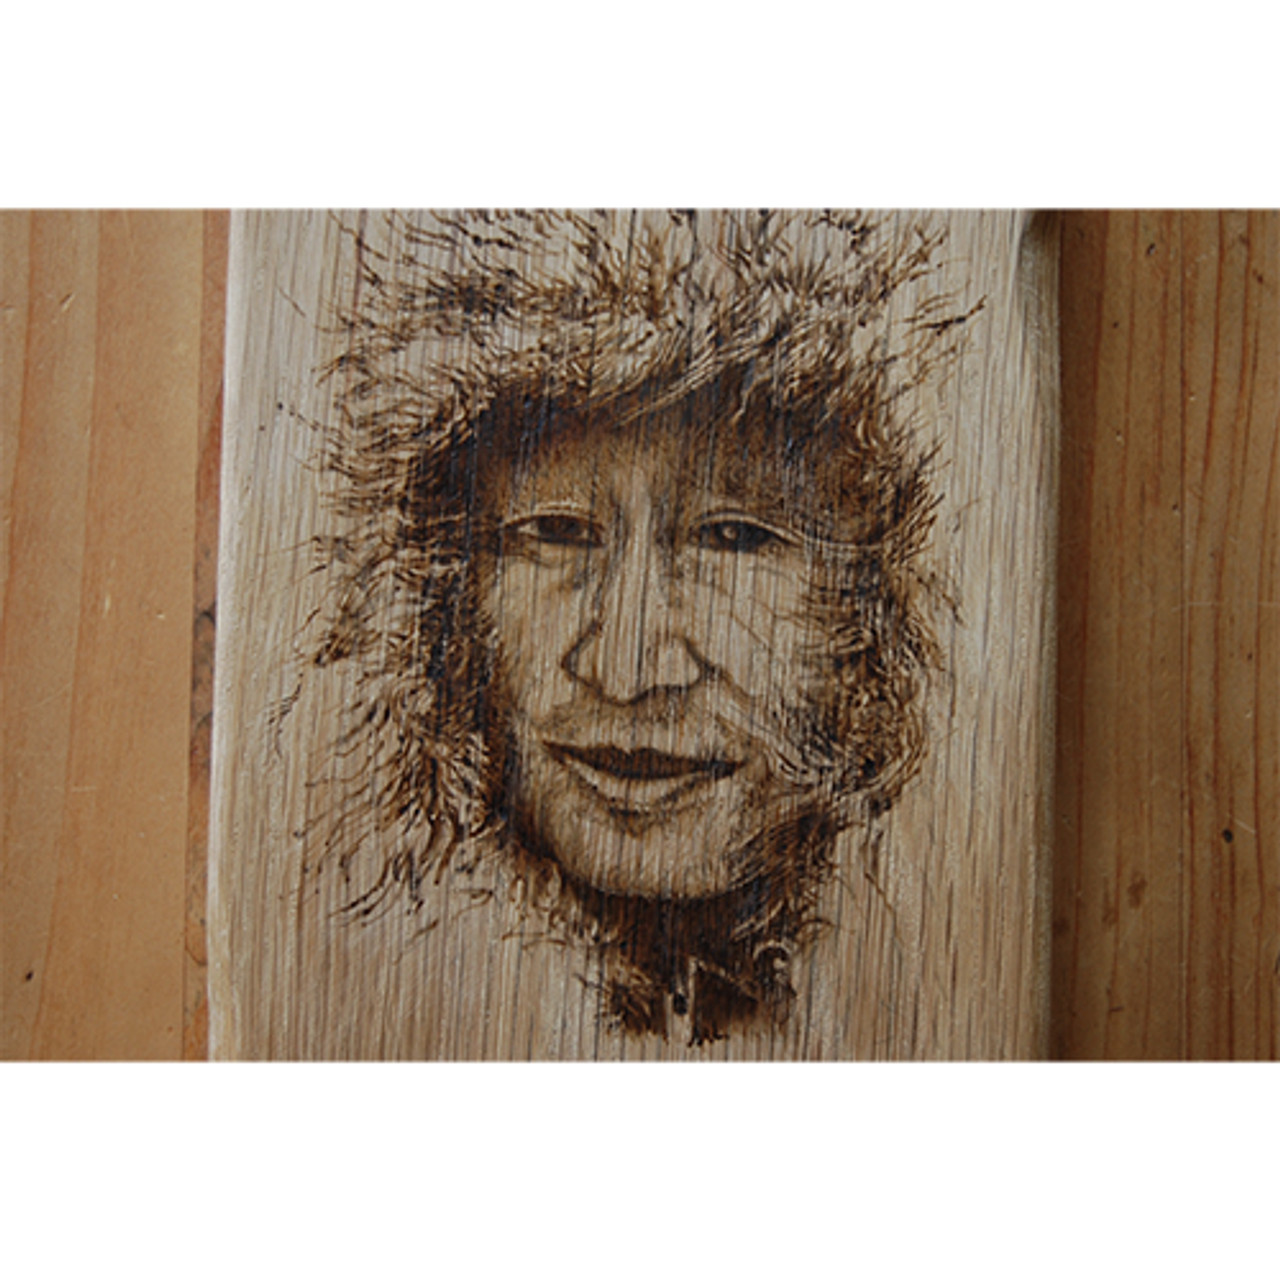 Your Pyrography Project - Wood Burning Units - 2